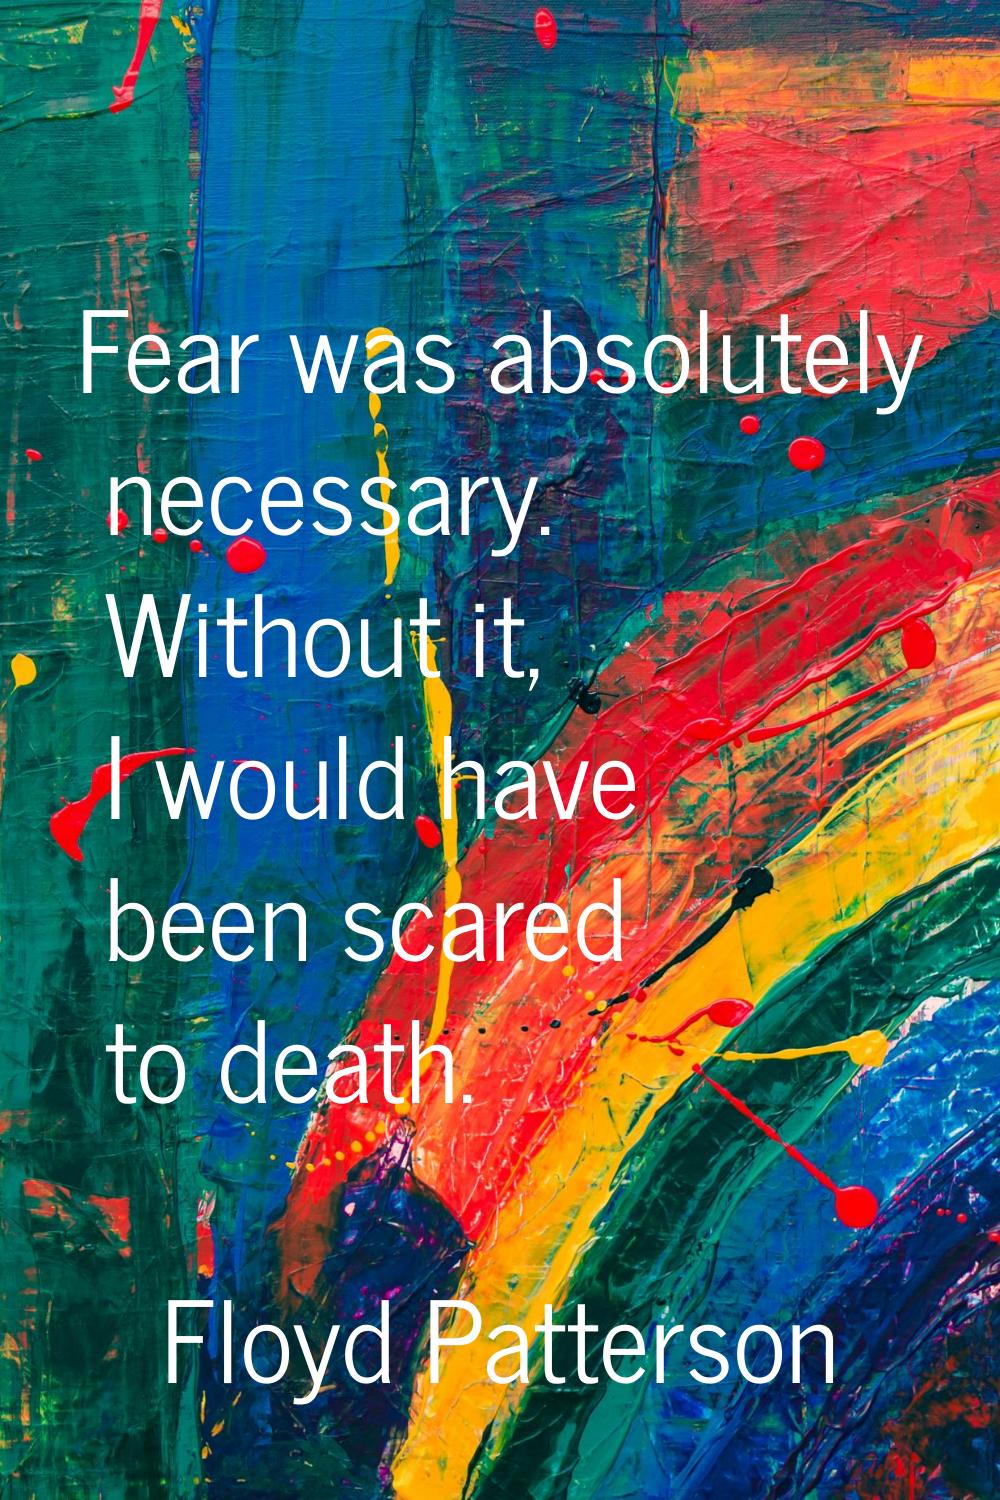 Fear was absolutely necessary. Without it, I would have been scared to death.